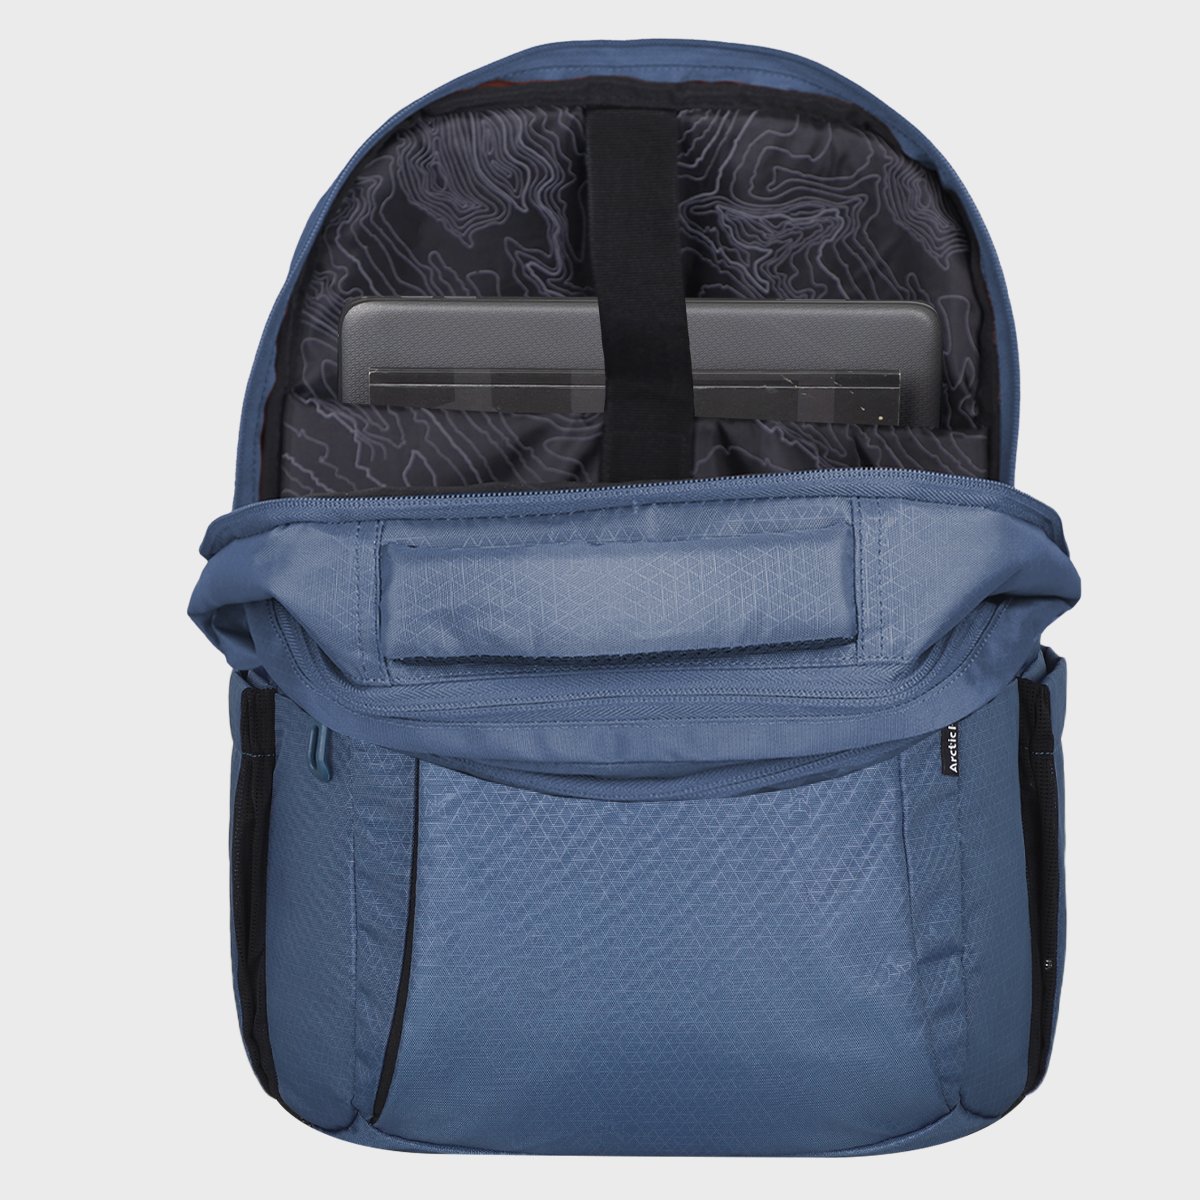 Arctic Fox  Smooth 38L Laptop Backpack